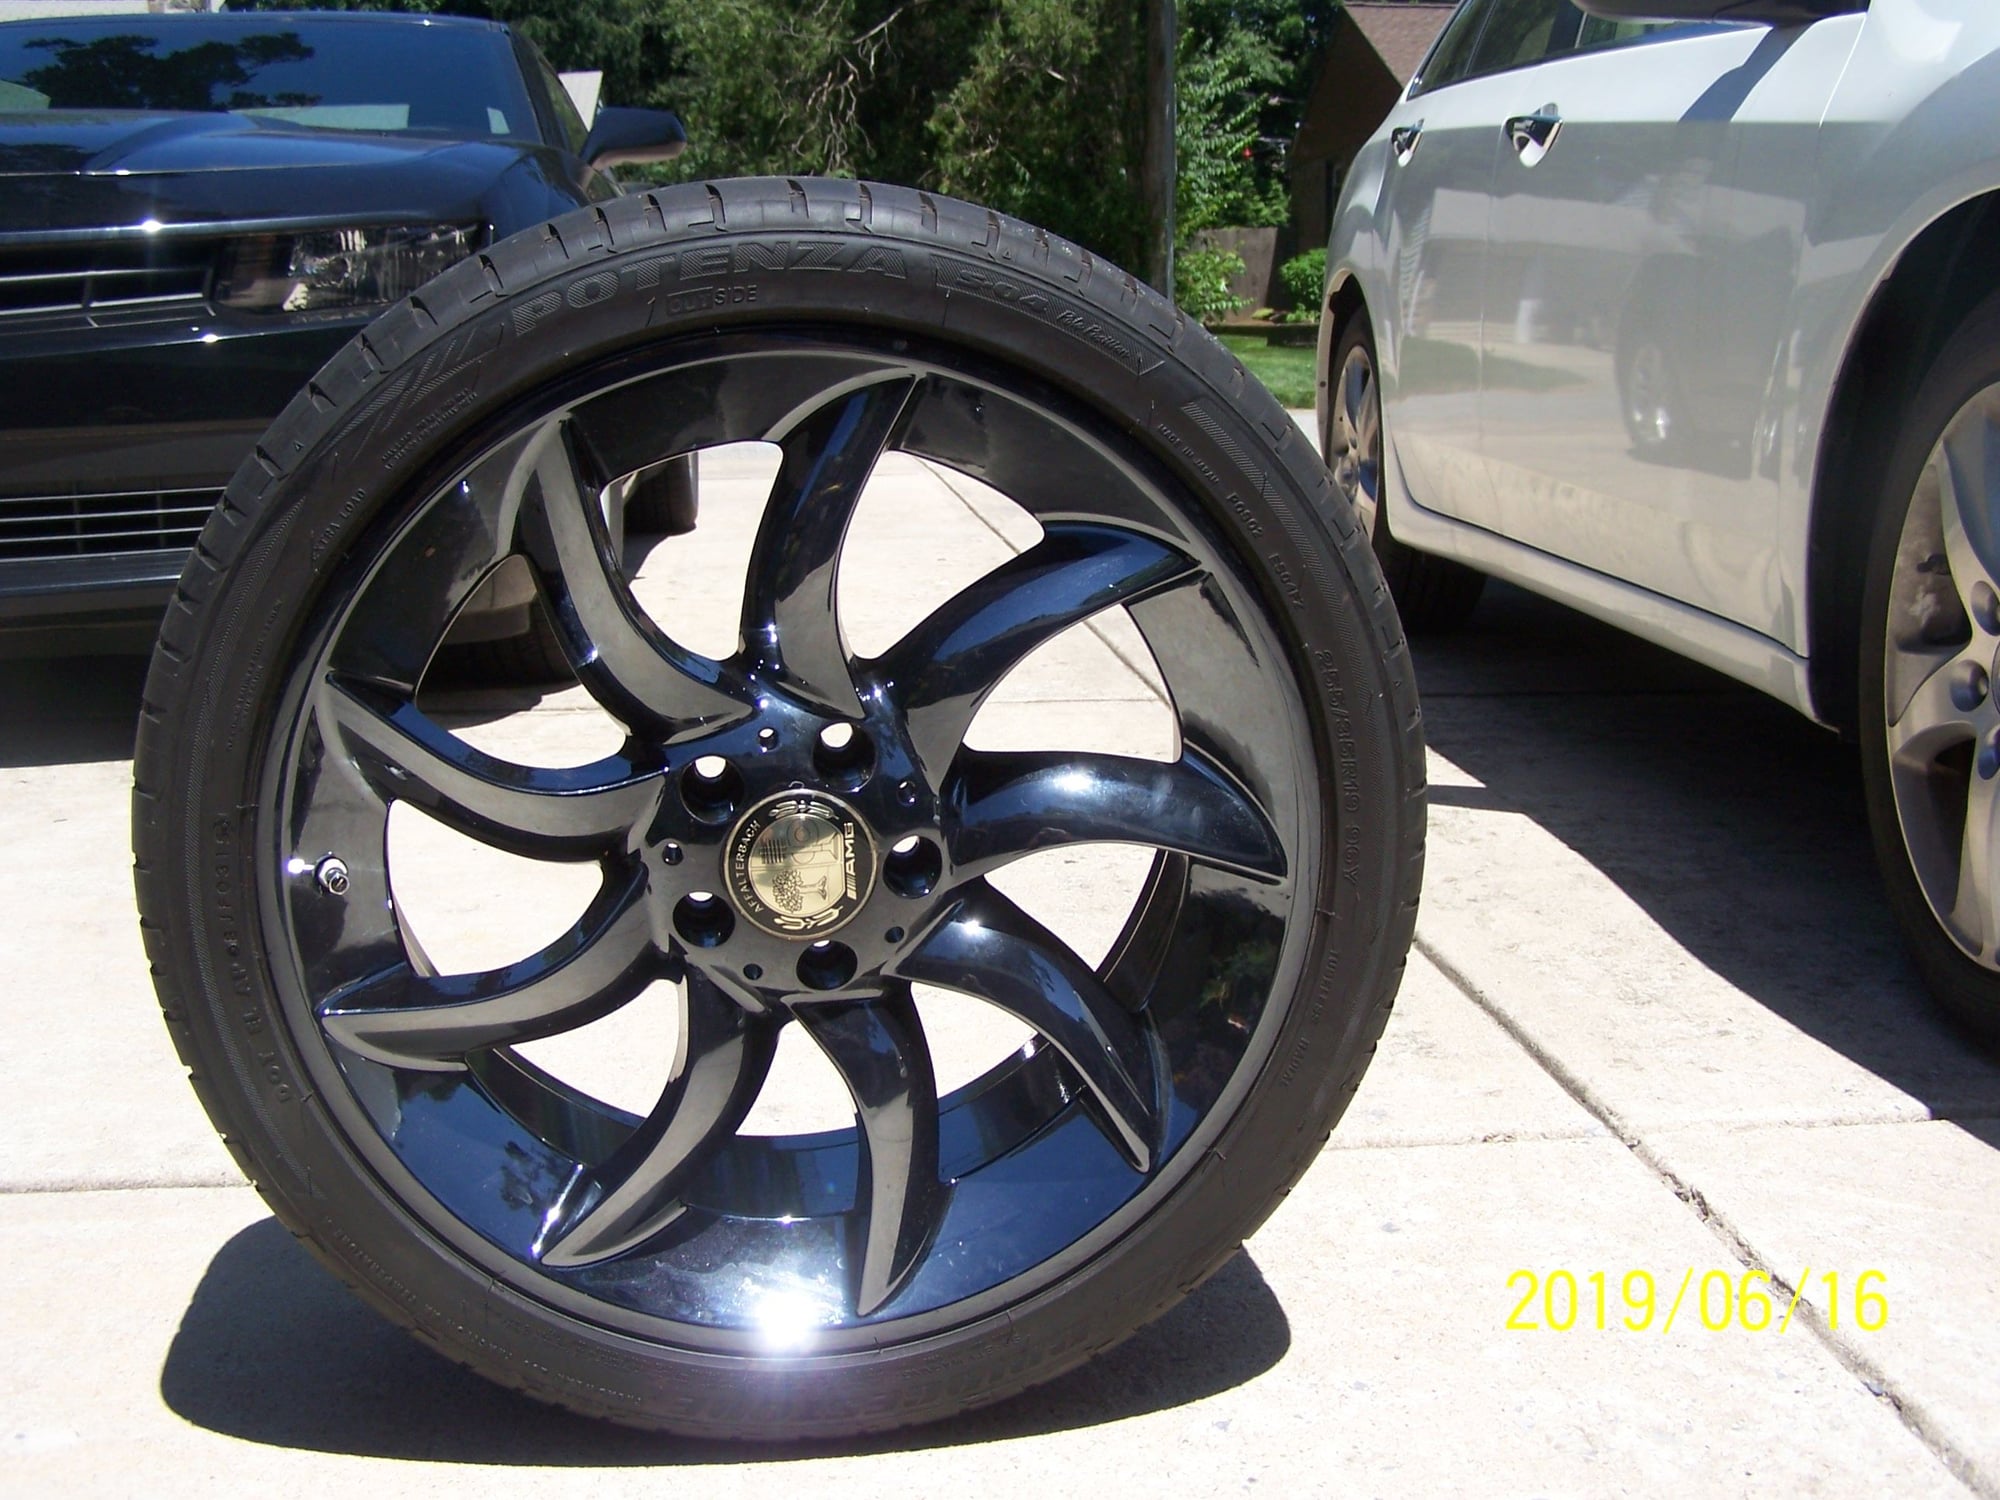 Wheels and Tires/Axles - SLR MCLAREN 2005-2009 TURBINE WHEEL  MODIFIED TO FIT 2012 AMG SLS - Used - 2011 to 2014 Mercedes-Benz SLS AMG - Wilmington, DE 19803, United States